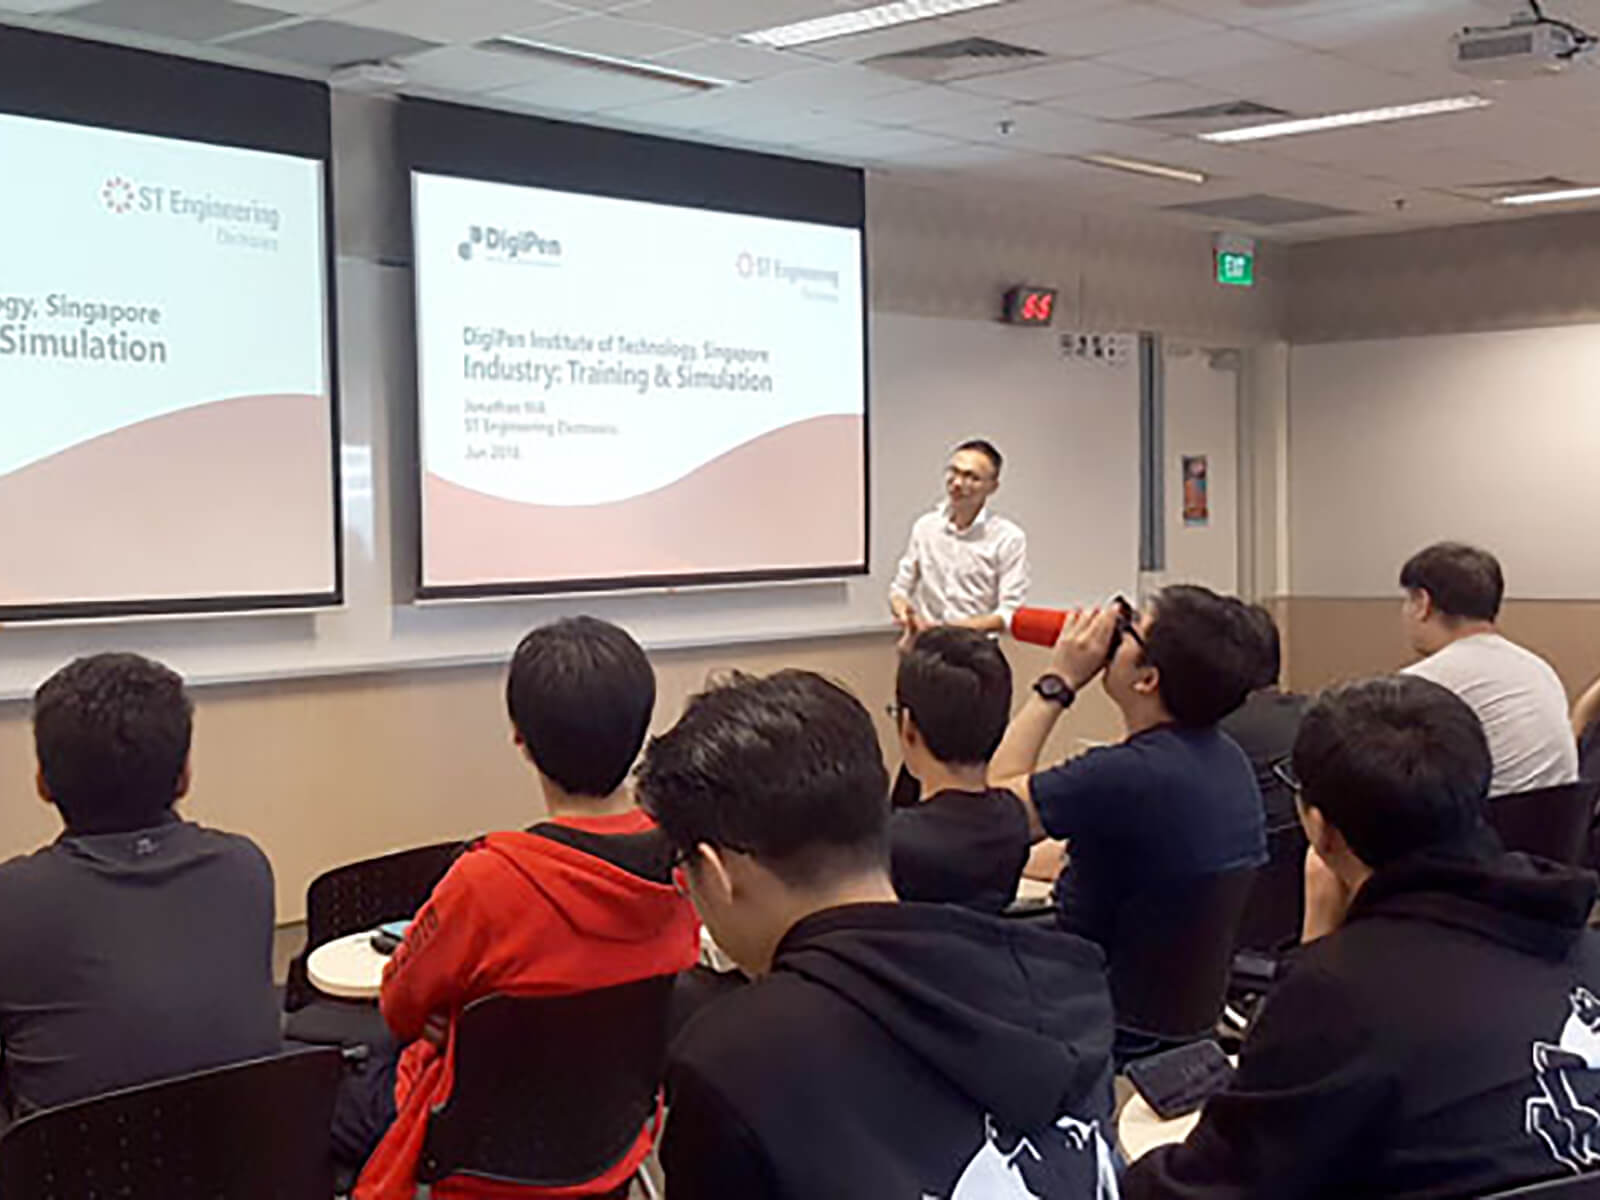 ST Engineering Assistant Division Manager Jonathan Hia speaks in front of a class of DigiPen (Singapore) students